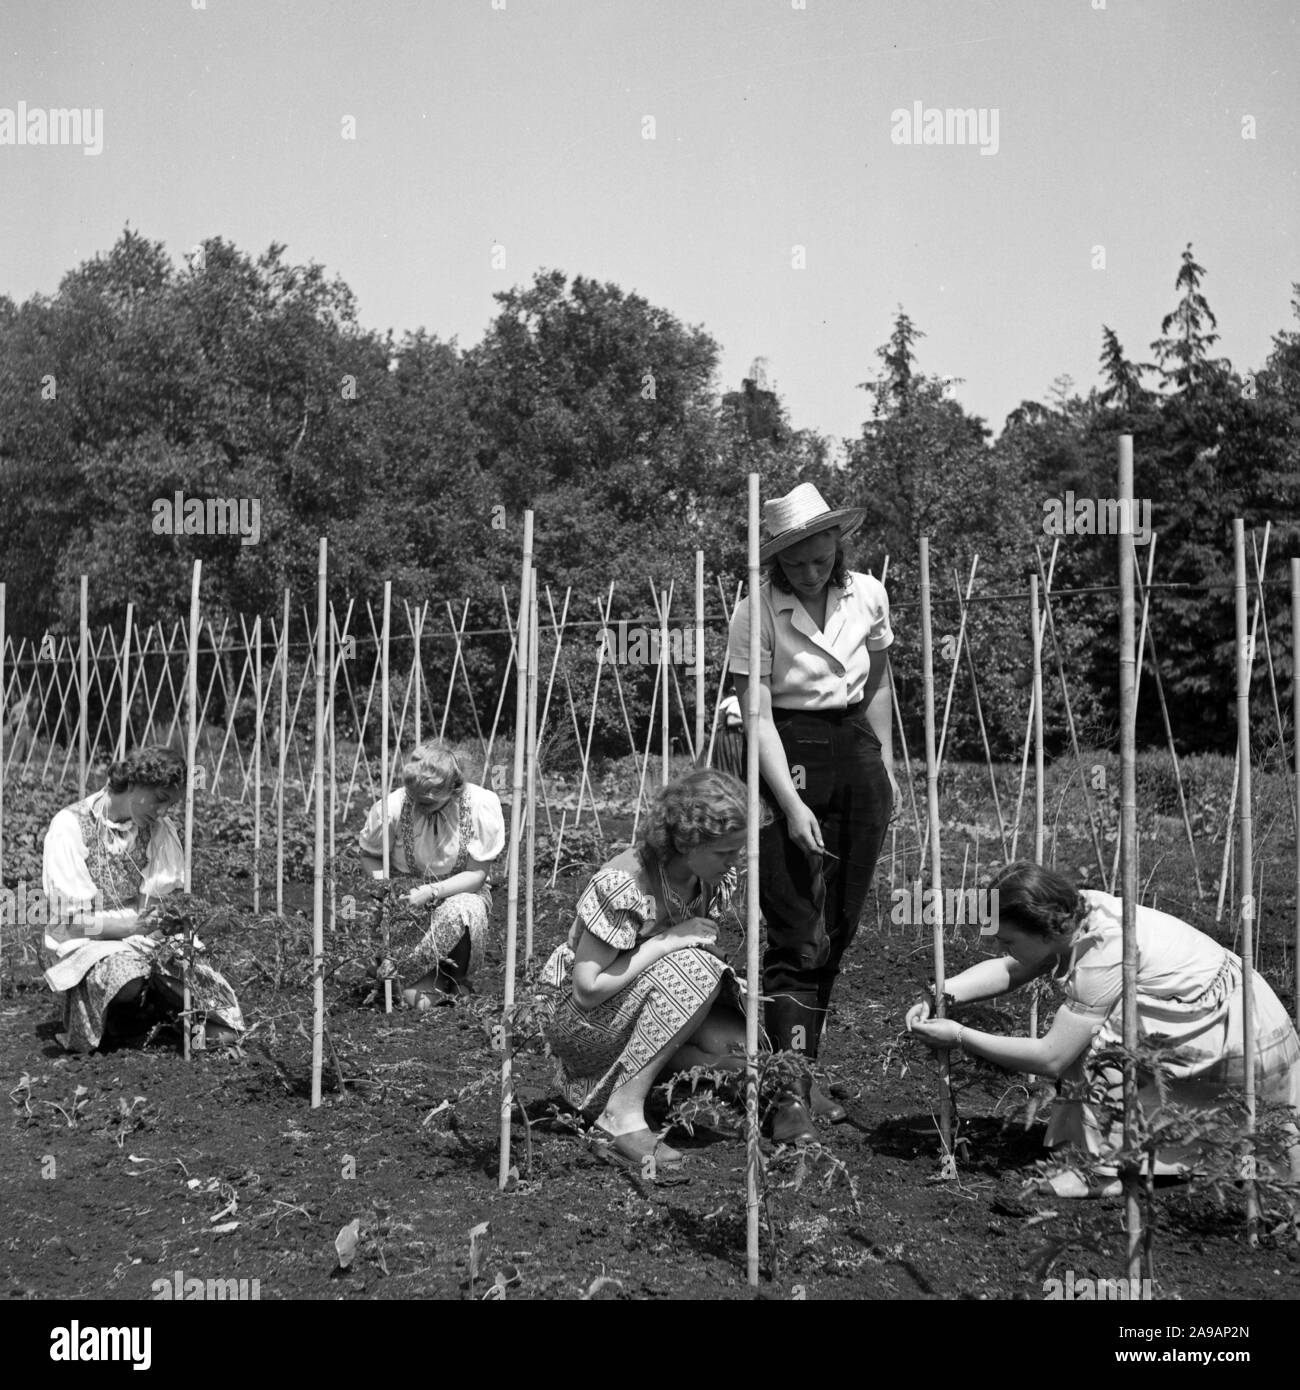 Women planting at the garden, Germany 1940s. Stock Photo